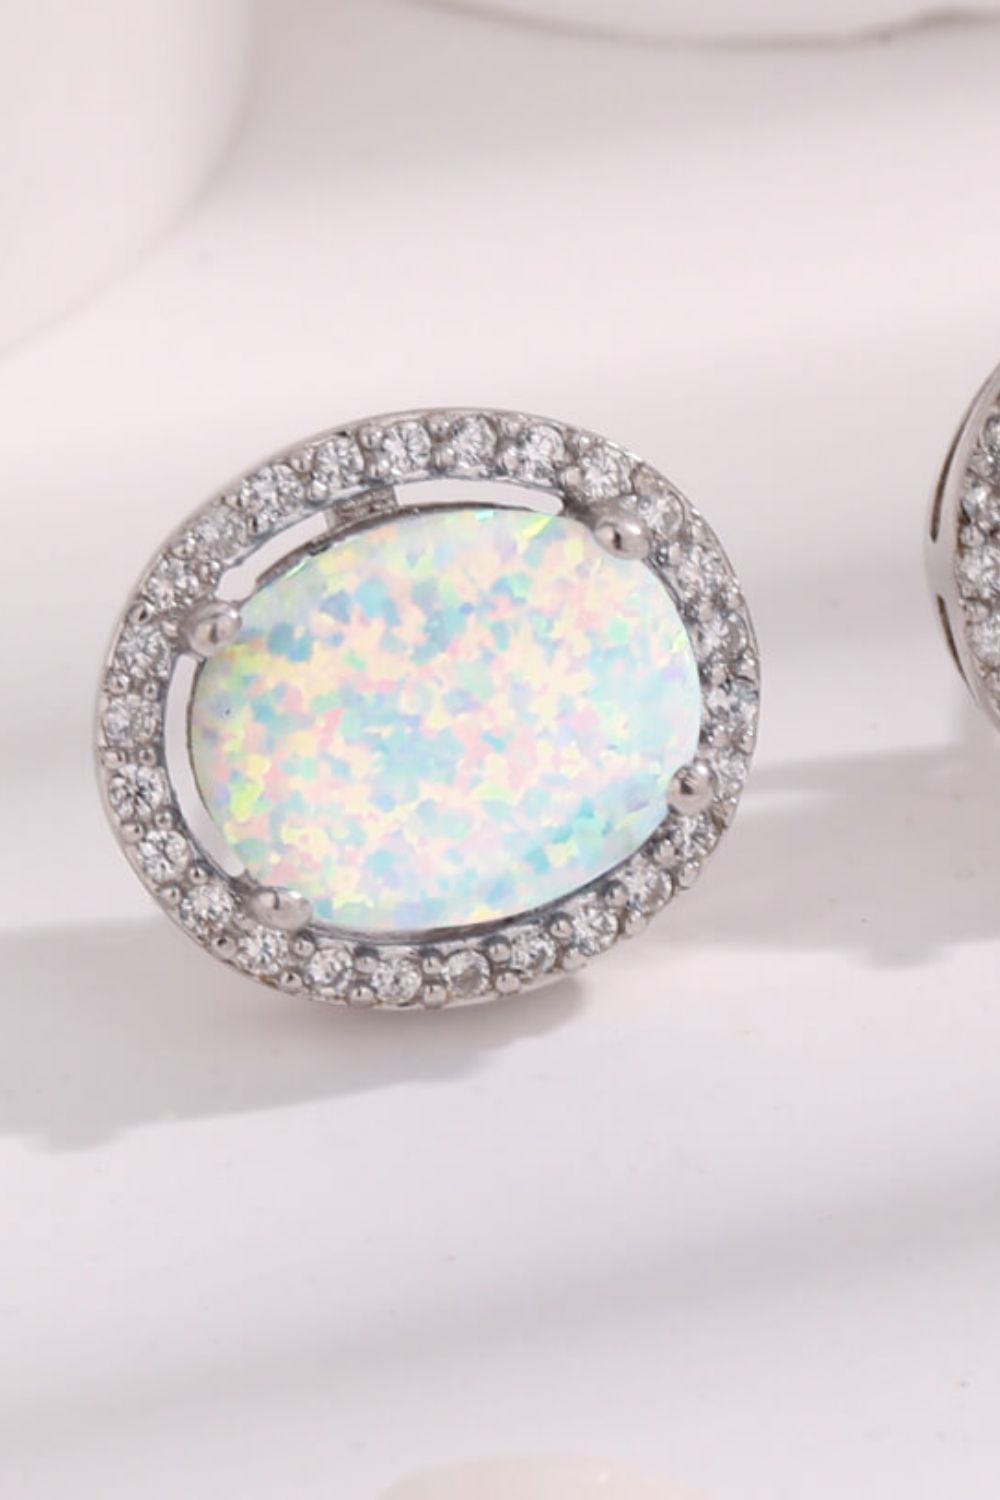 Opal Round Earrings - Sparkling Love from the Depths of Australia - A Timeless Treasure for Your Eternal Romance - Guy Christopher